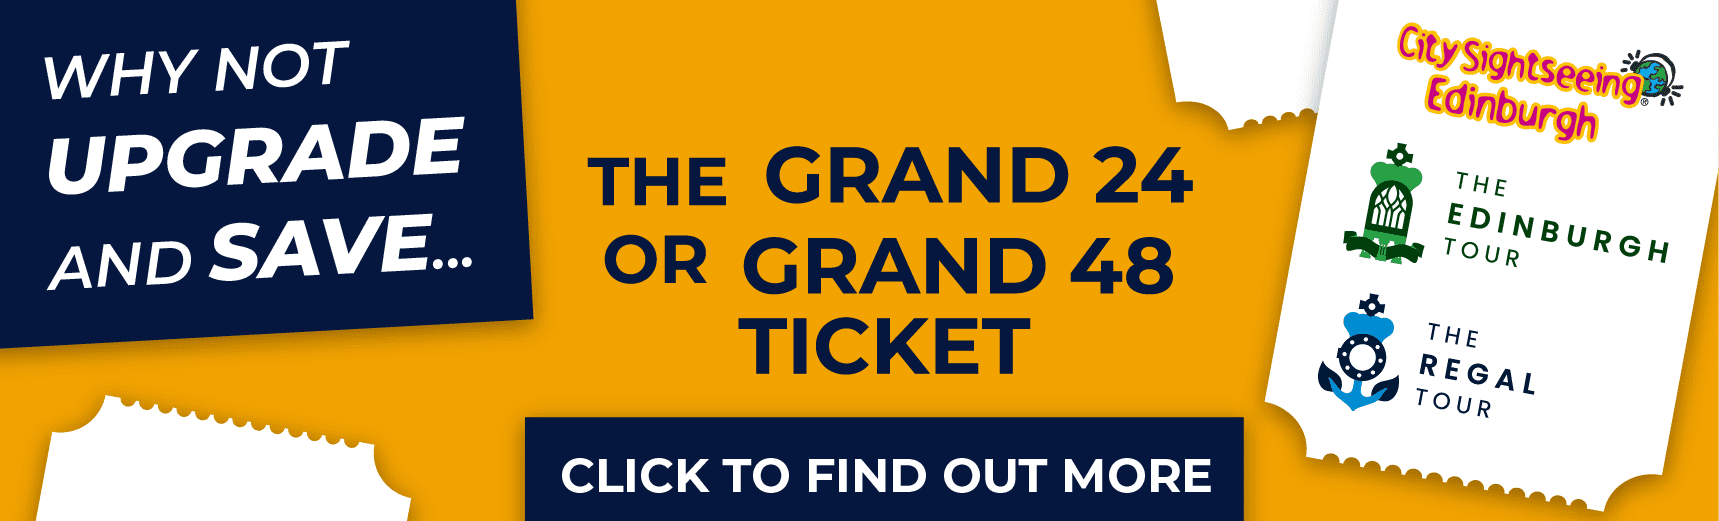 Why not upgrade and save with the Grand 24 or Grand 48 Ticket. Click to find out more.